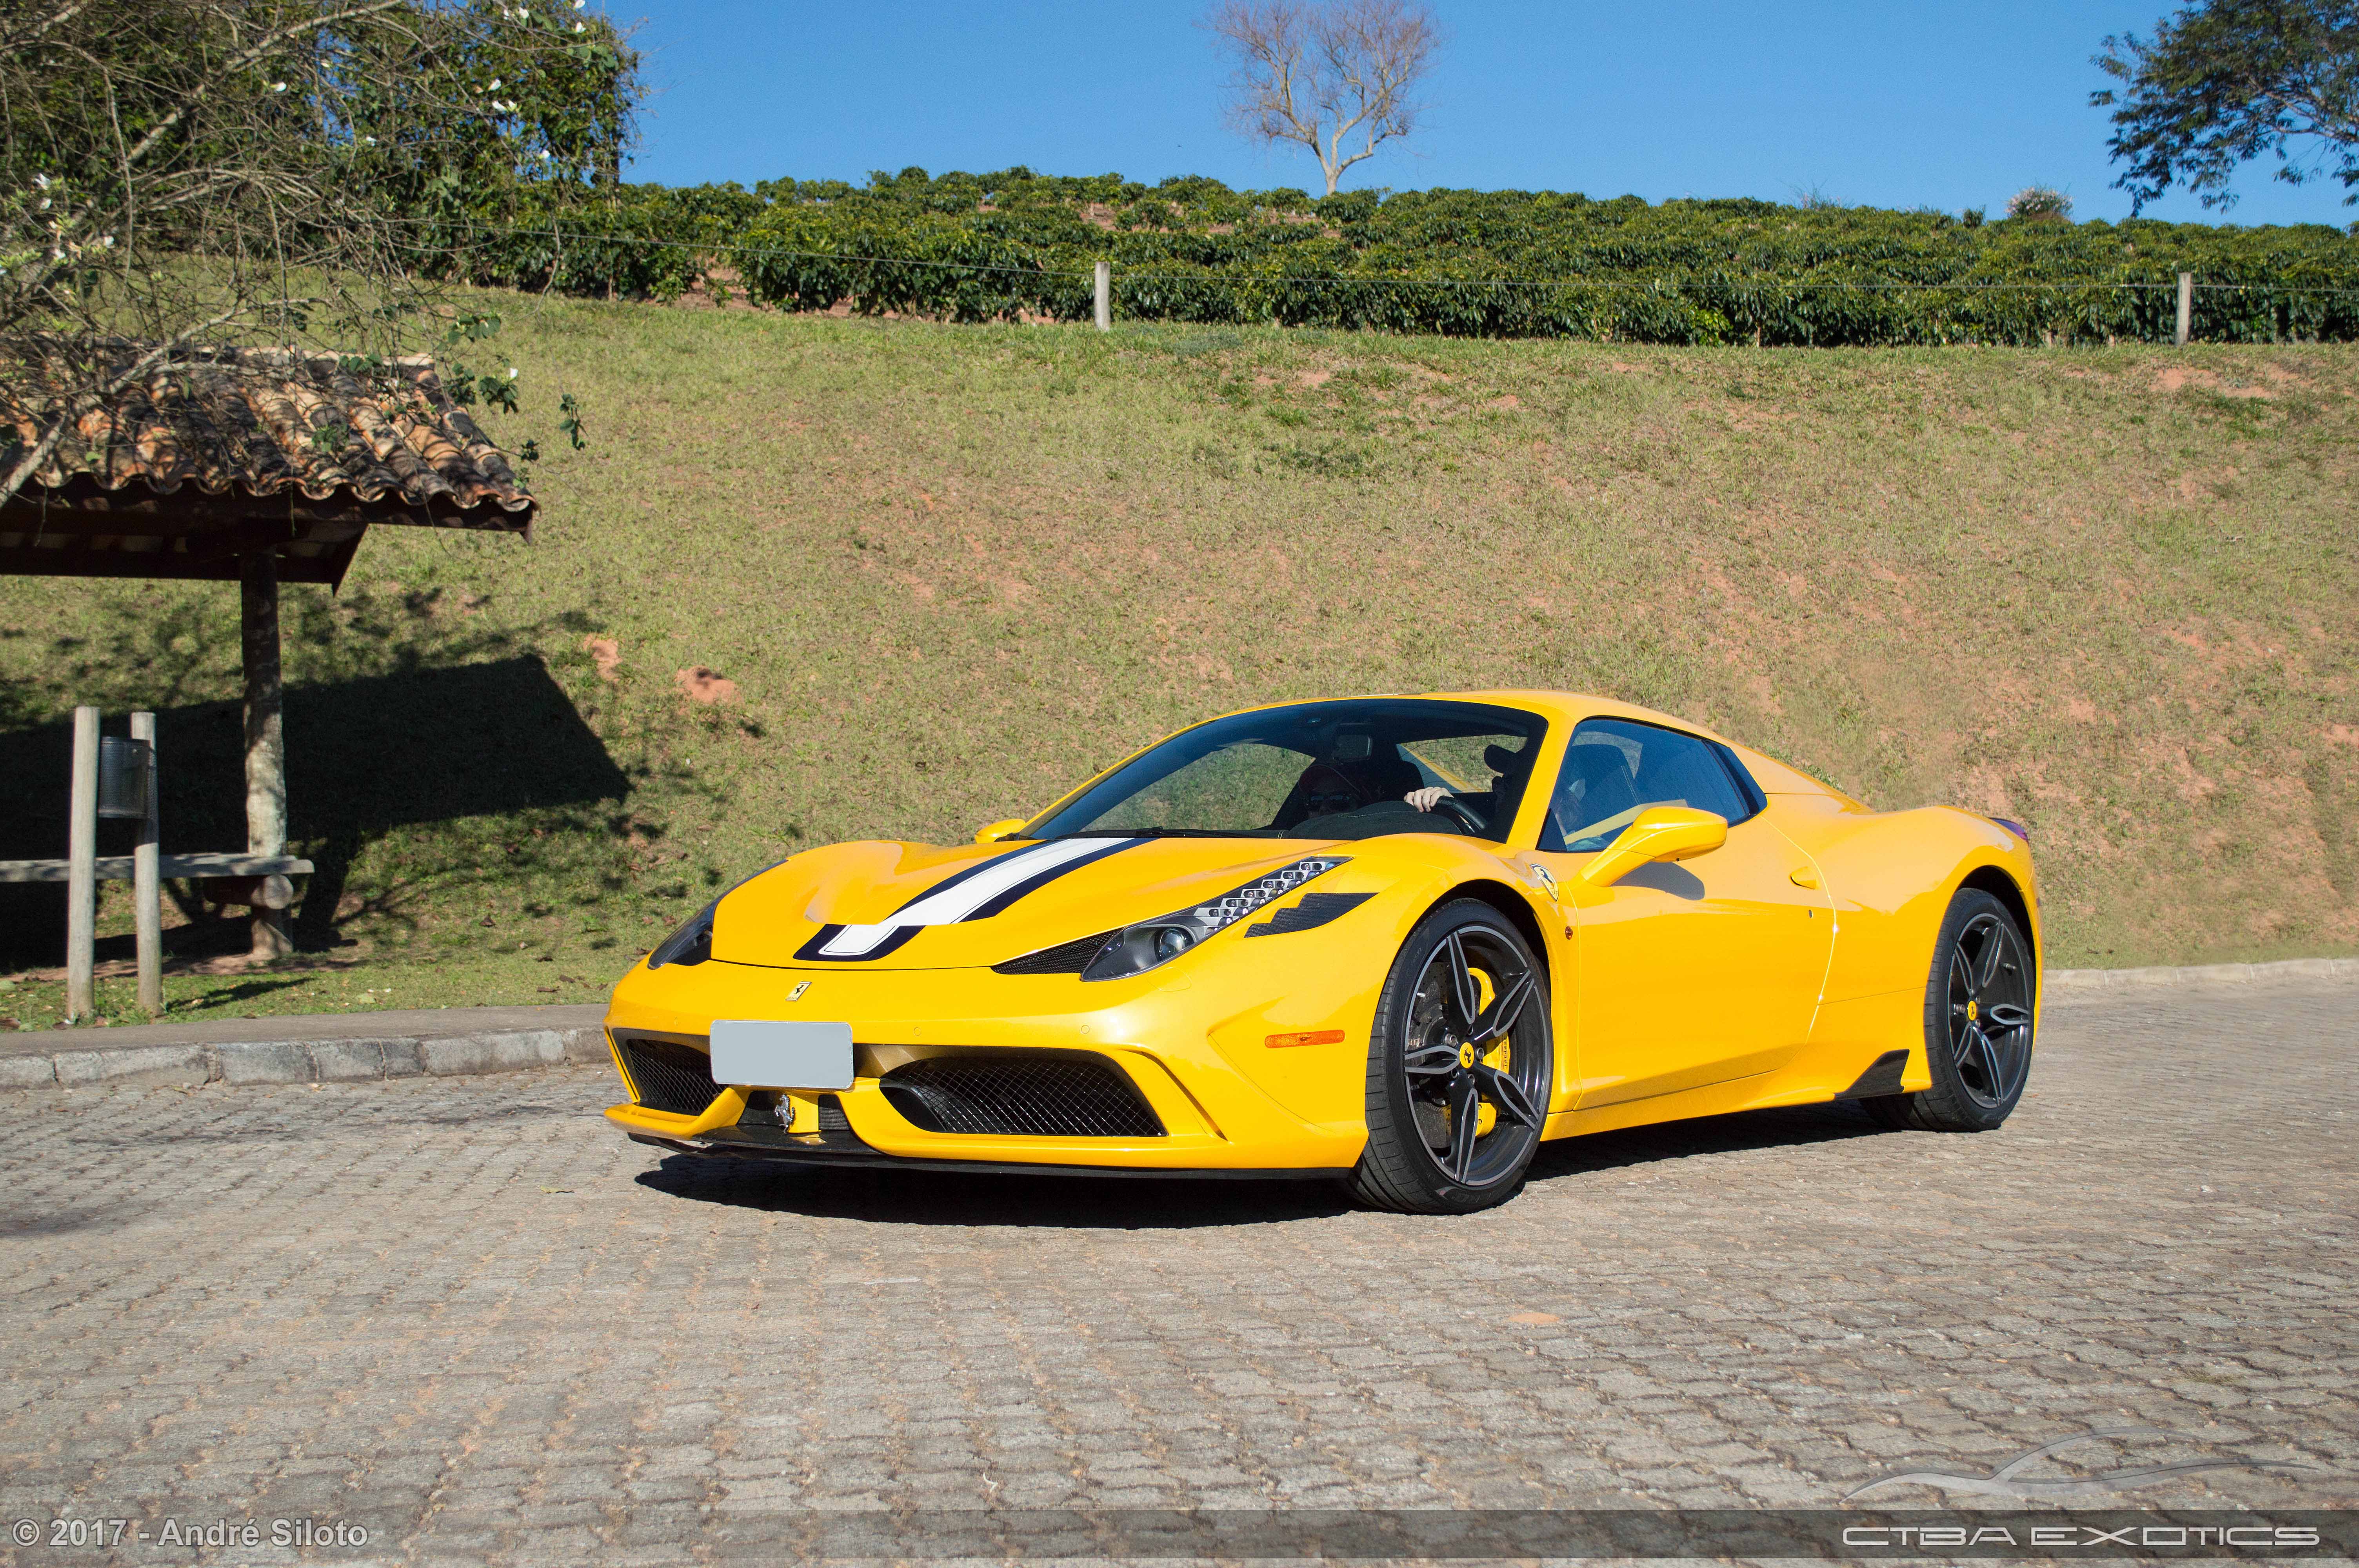 Speciale 8